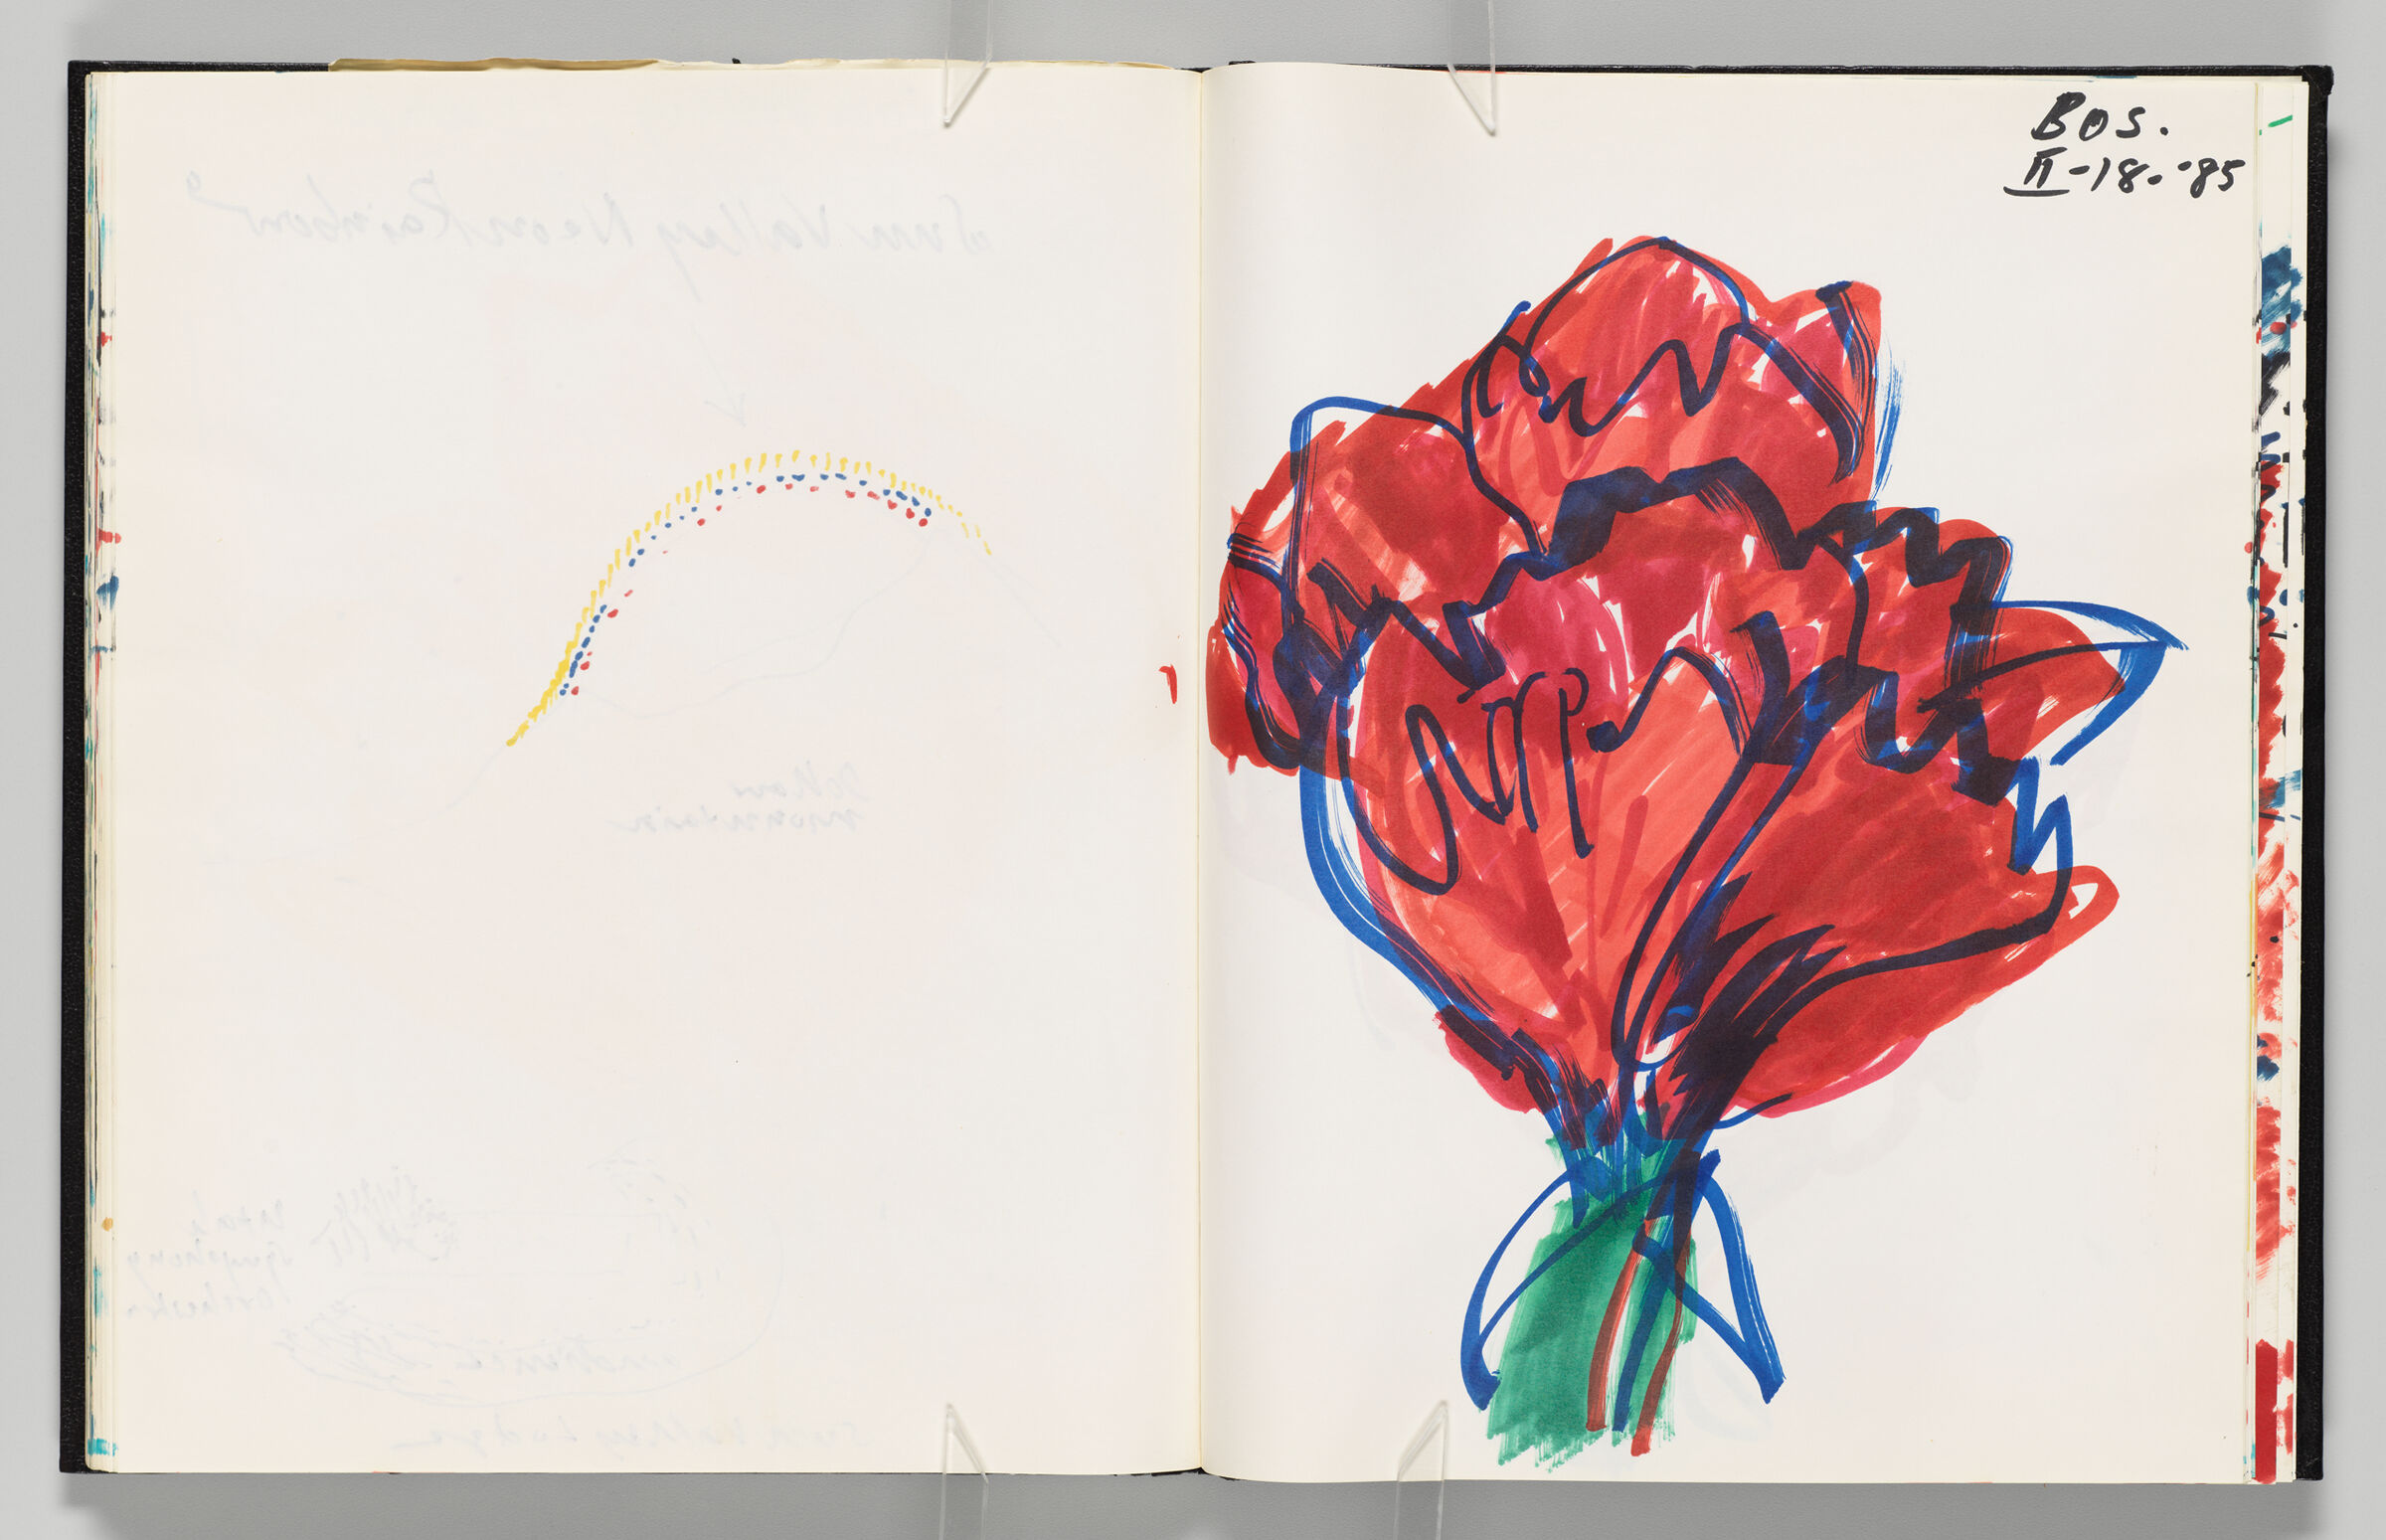 Untitled (Bleed-Through Of Previous Page, Left Page); Untitled (Amaryllis Bouquet, Right Page)